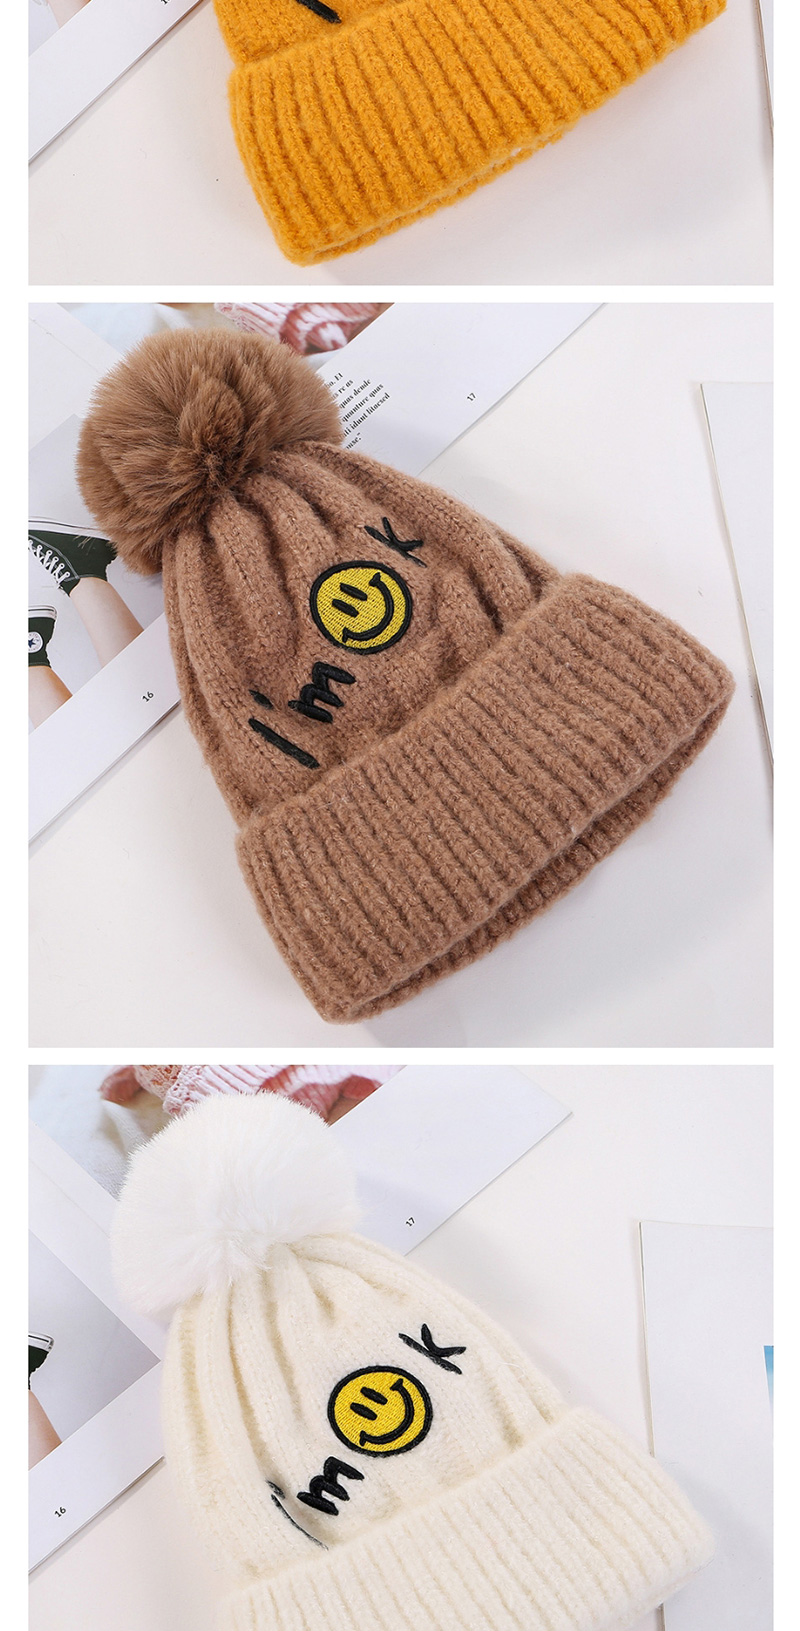 Fashion White Embroidered Smiley Letters Plus Velvet Knitted Hat,Knitting Wool Hats